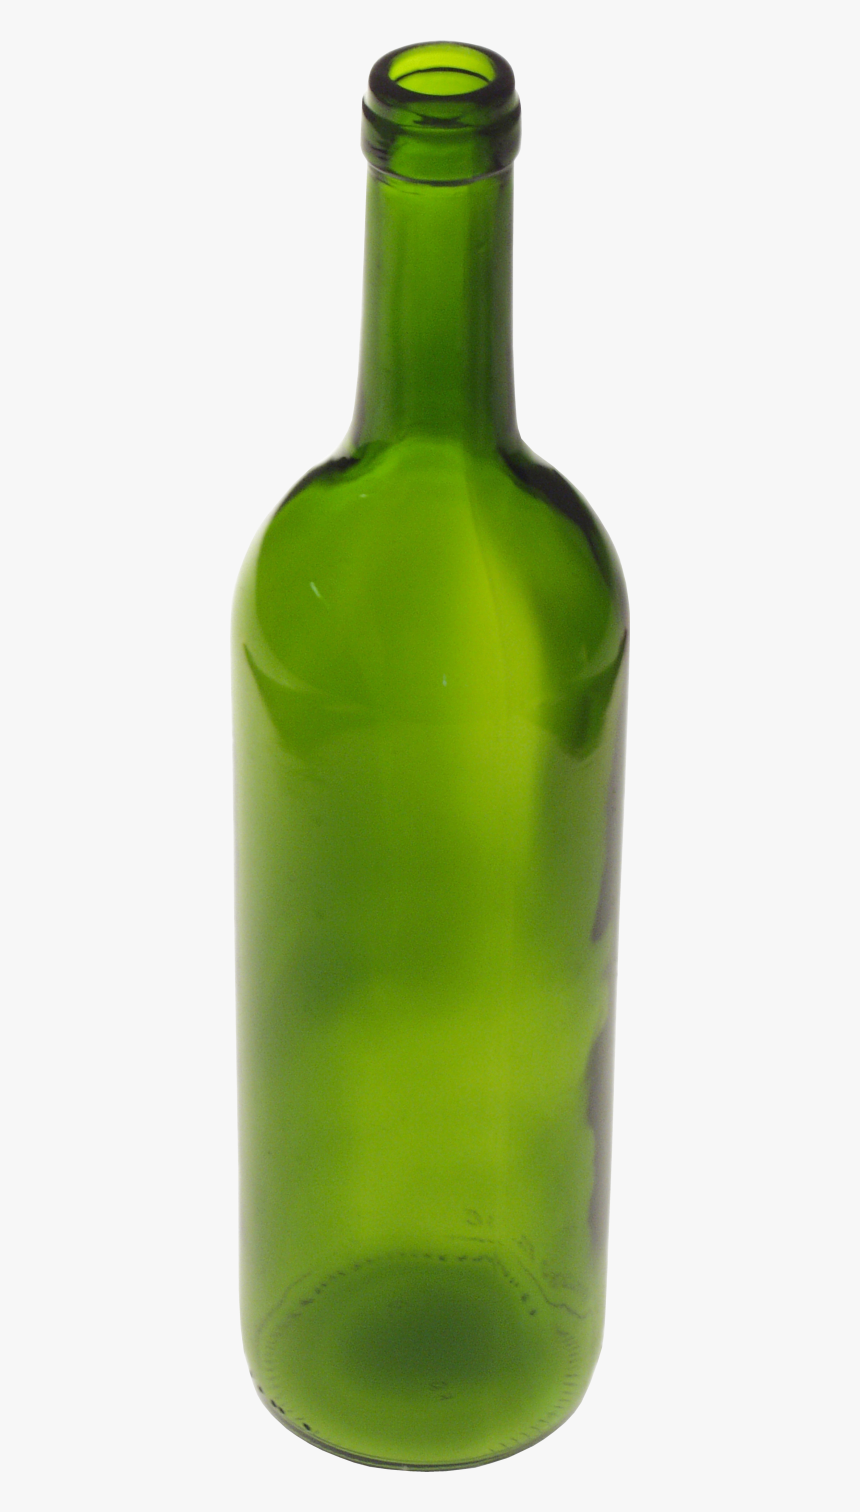 Bottle Hd Photo - Бутылка Png, Transparent Png, Free Download